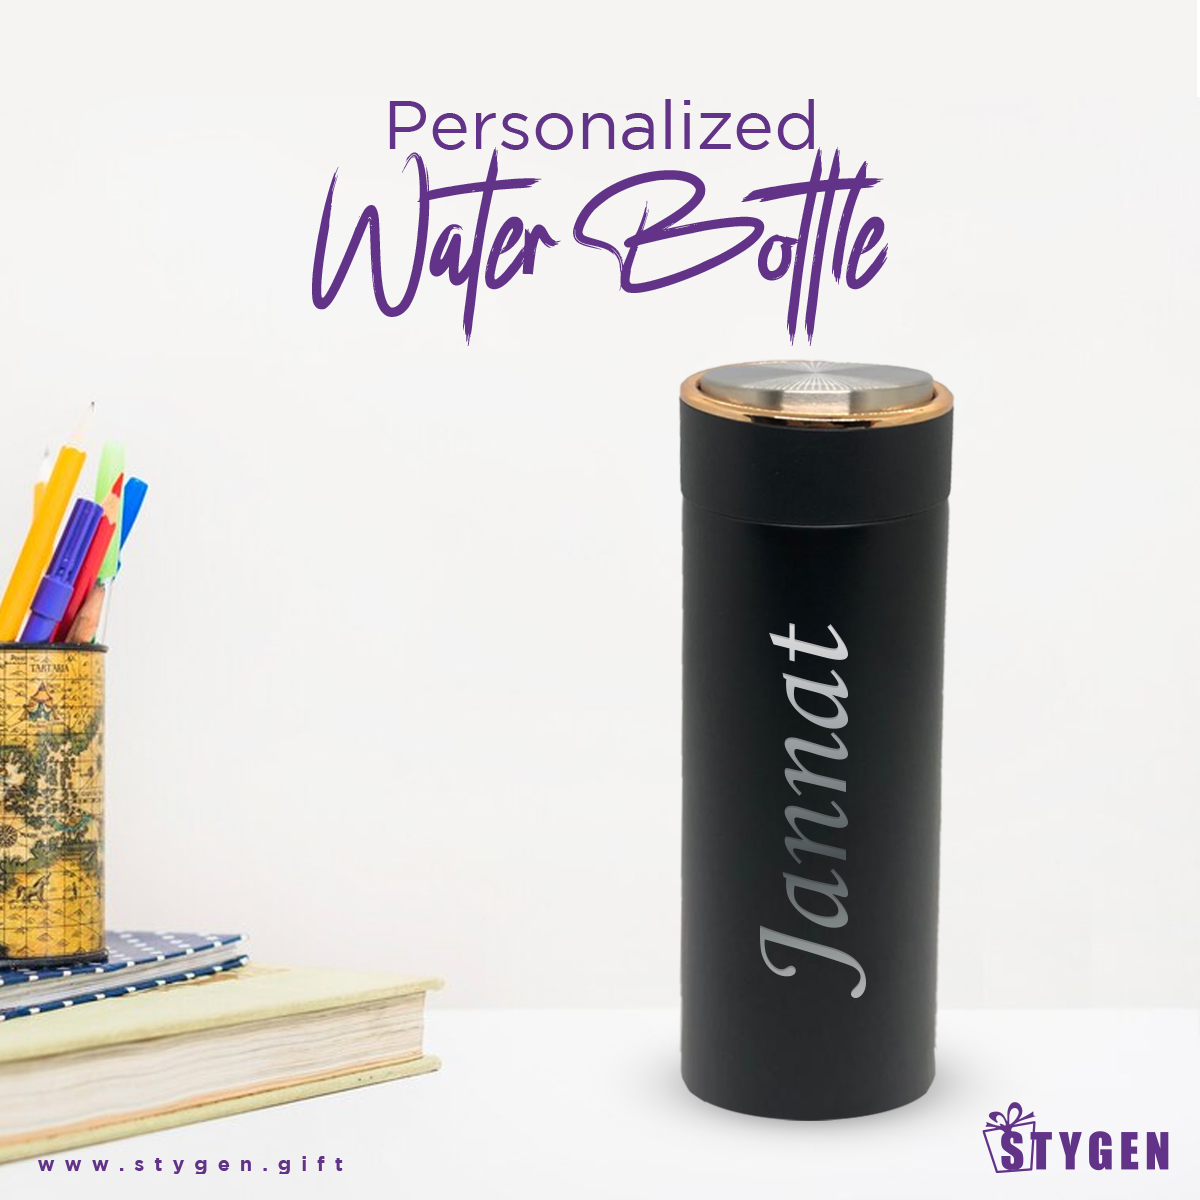 Personalized Thermos Water Bottle for your loved one (09)